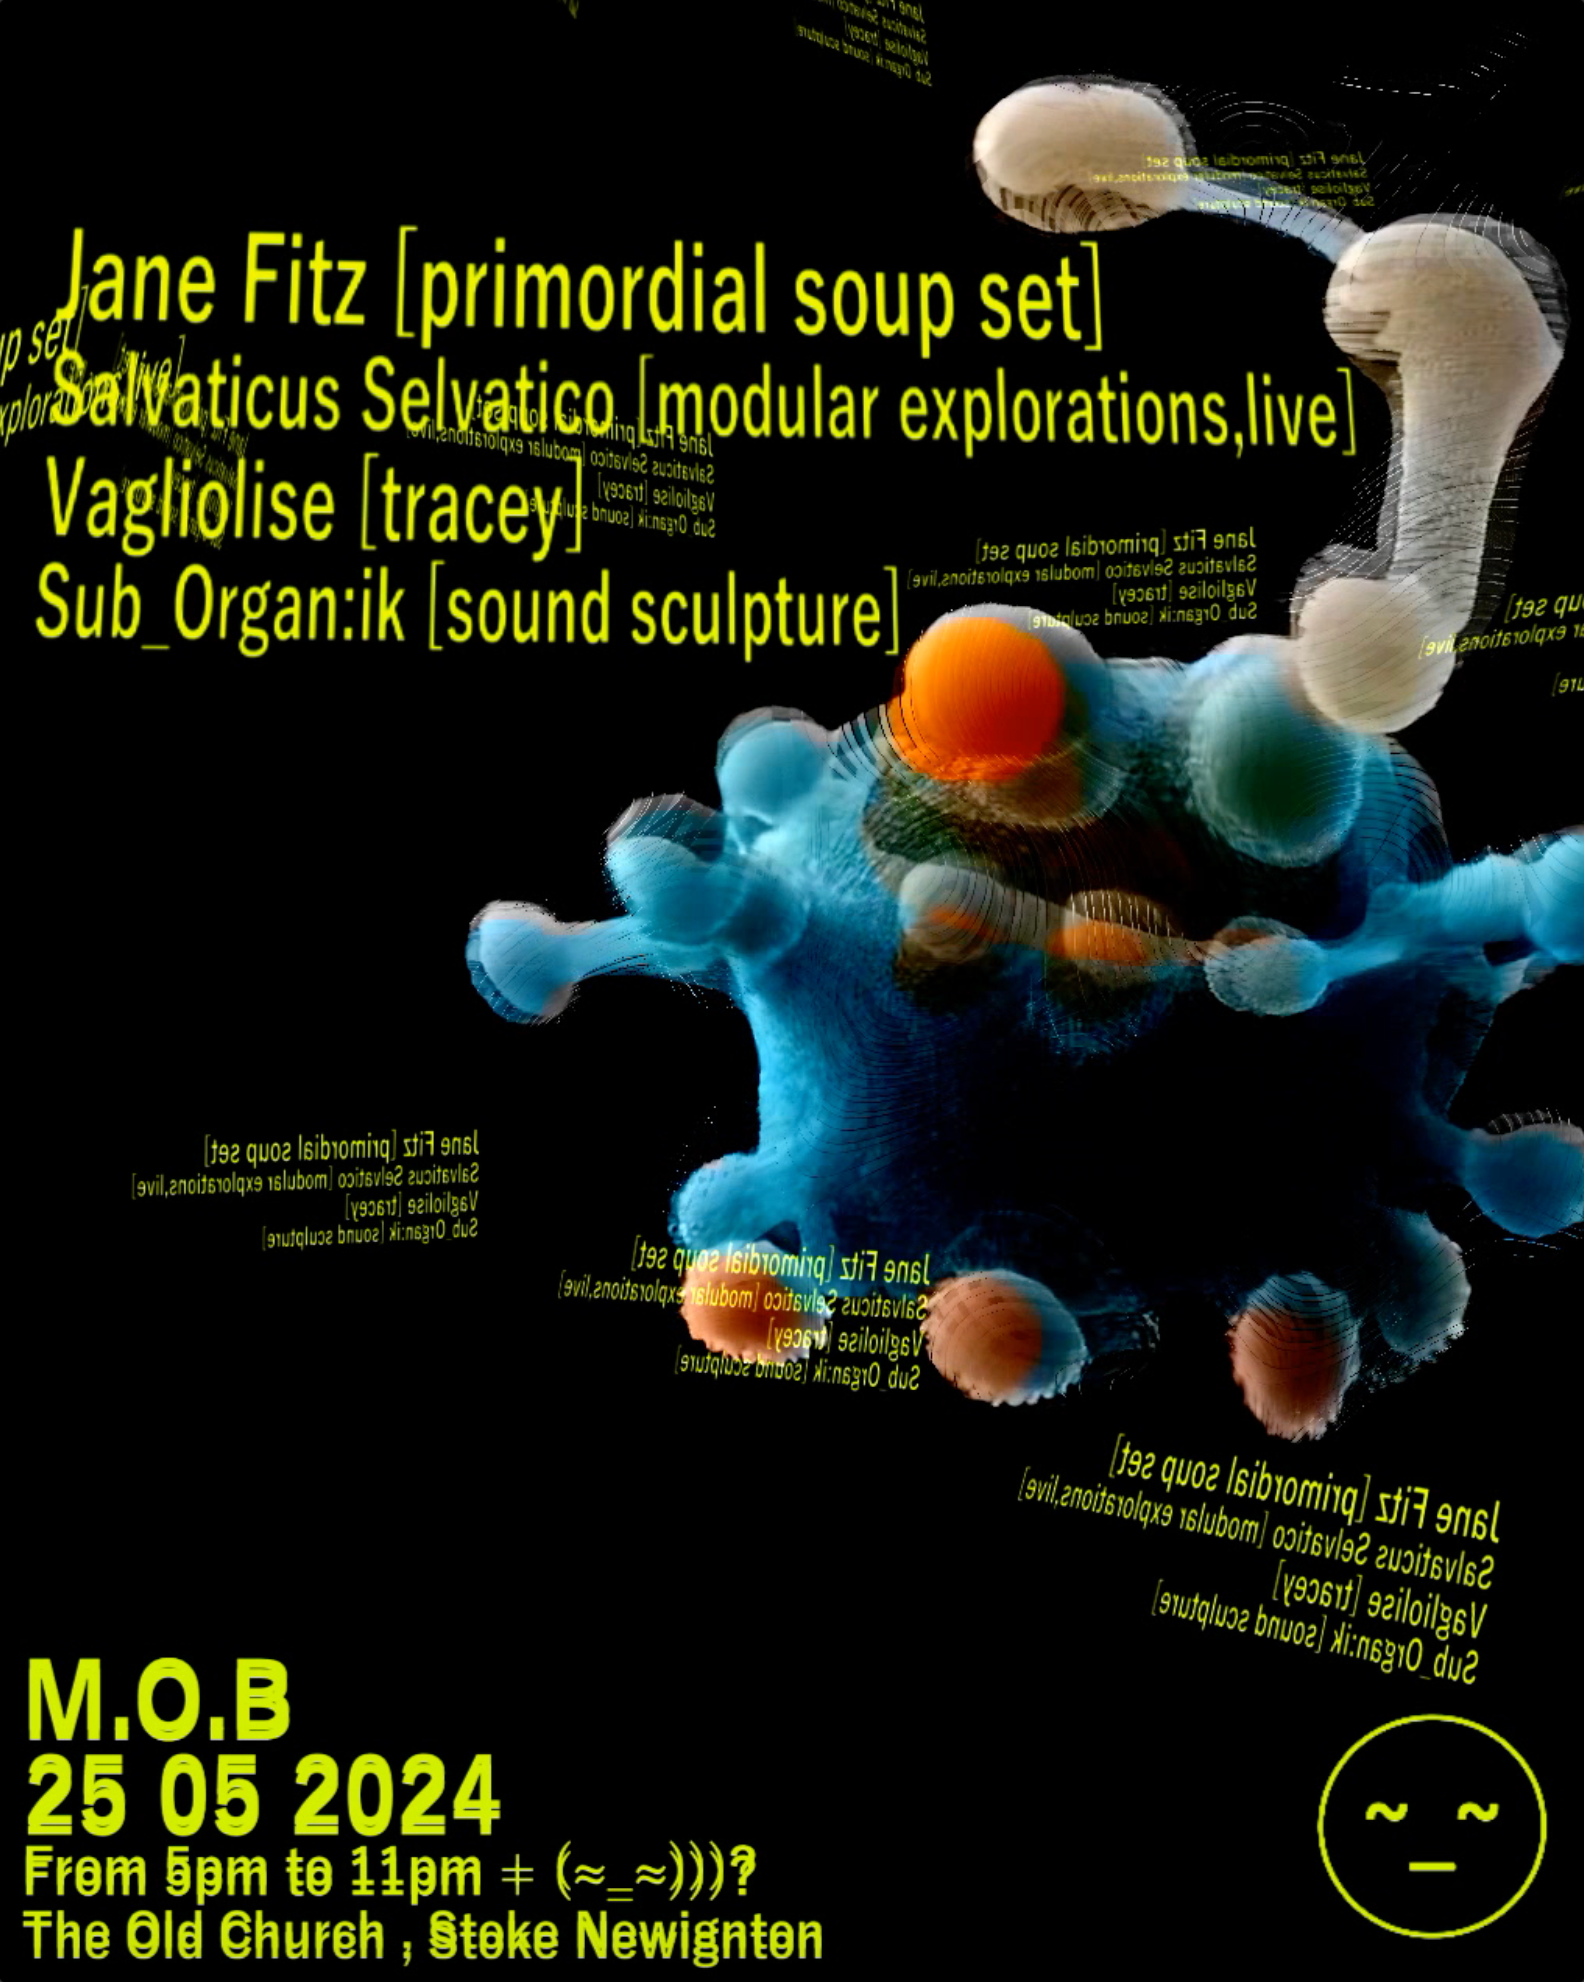 7 years of M.O.B with Jane Fitz - Página frontal